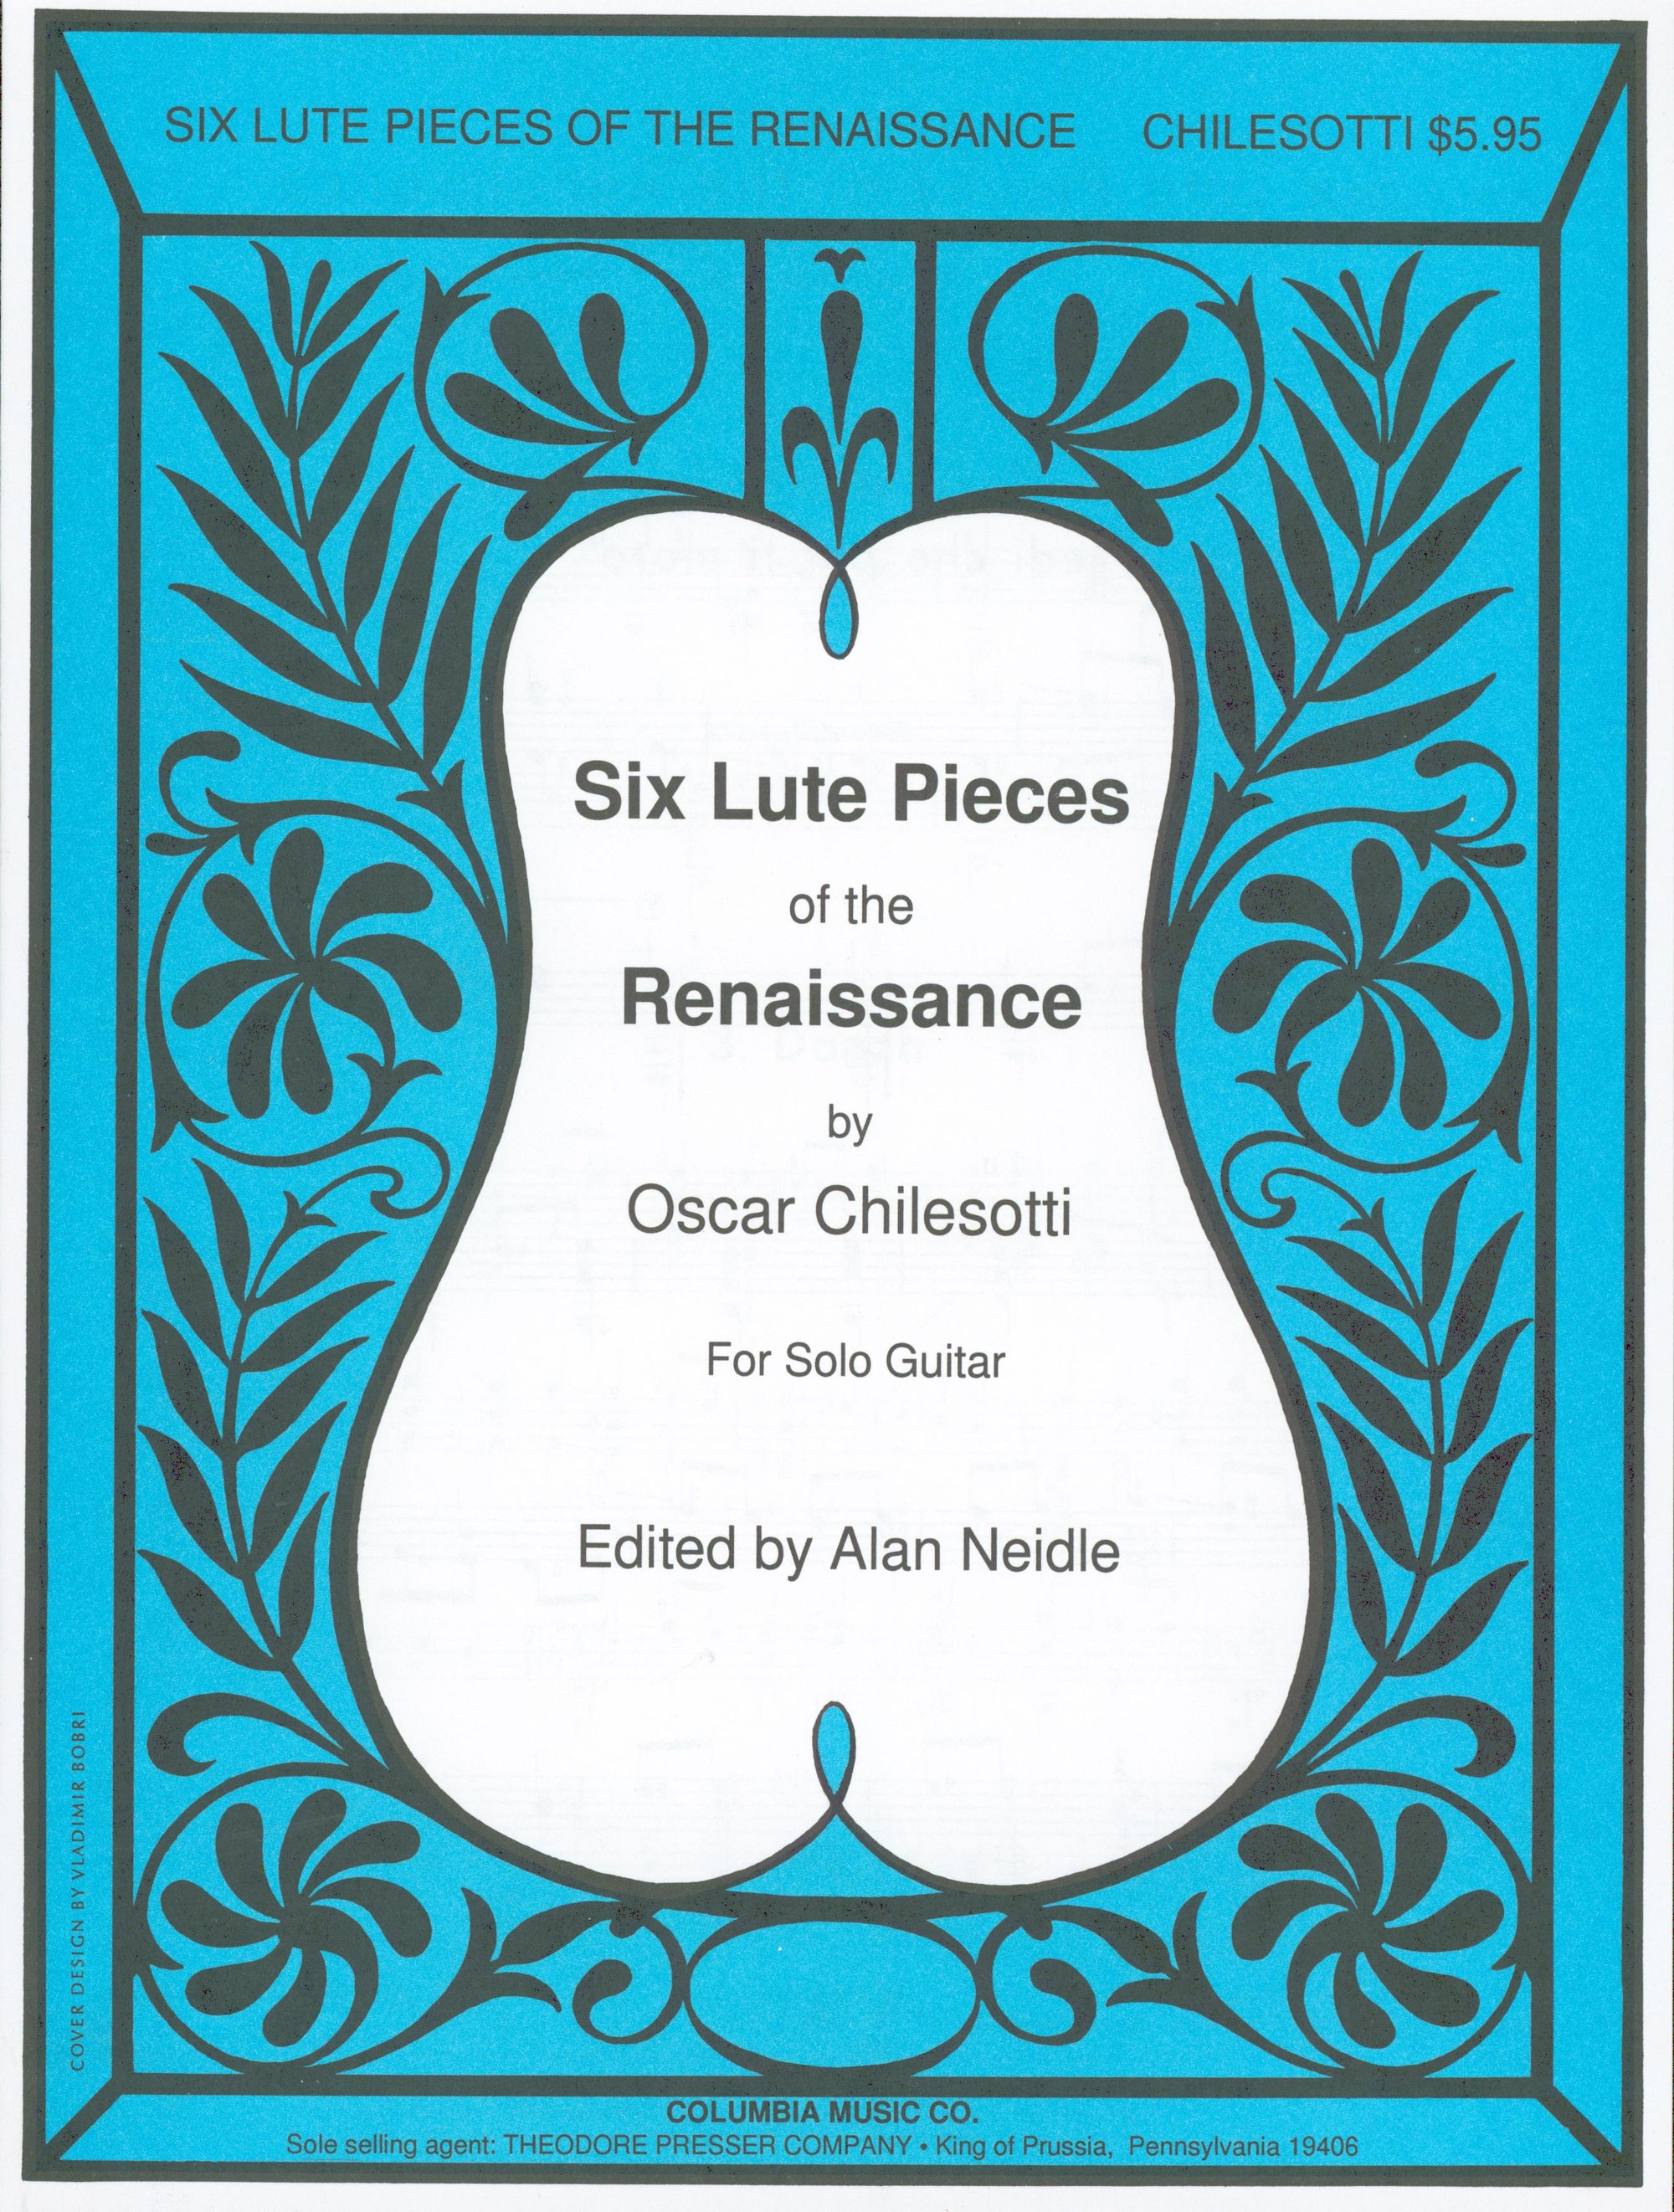 Chilesotti: 6 Lute Pieces of the Renaissance